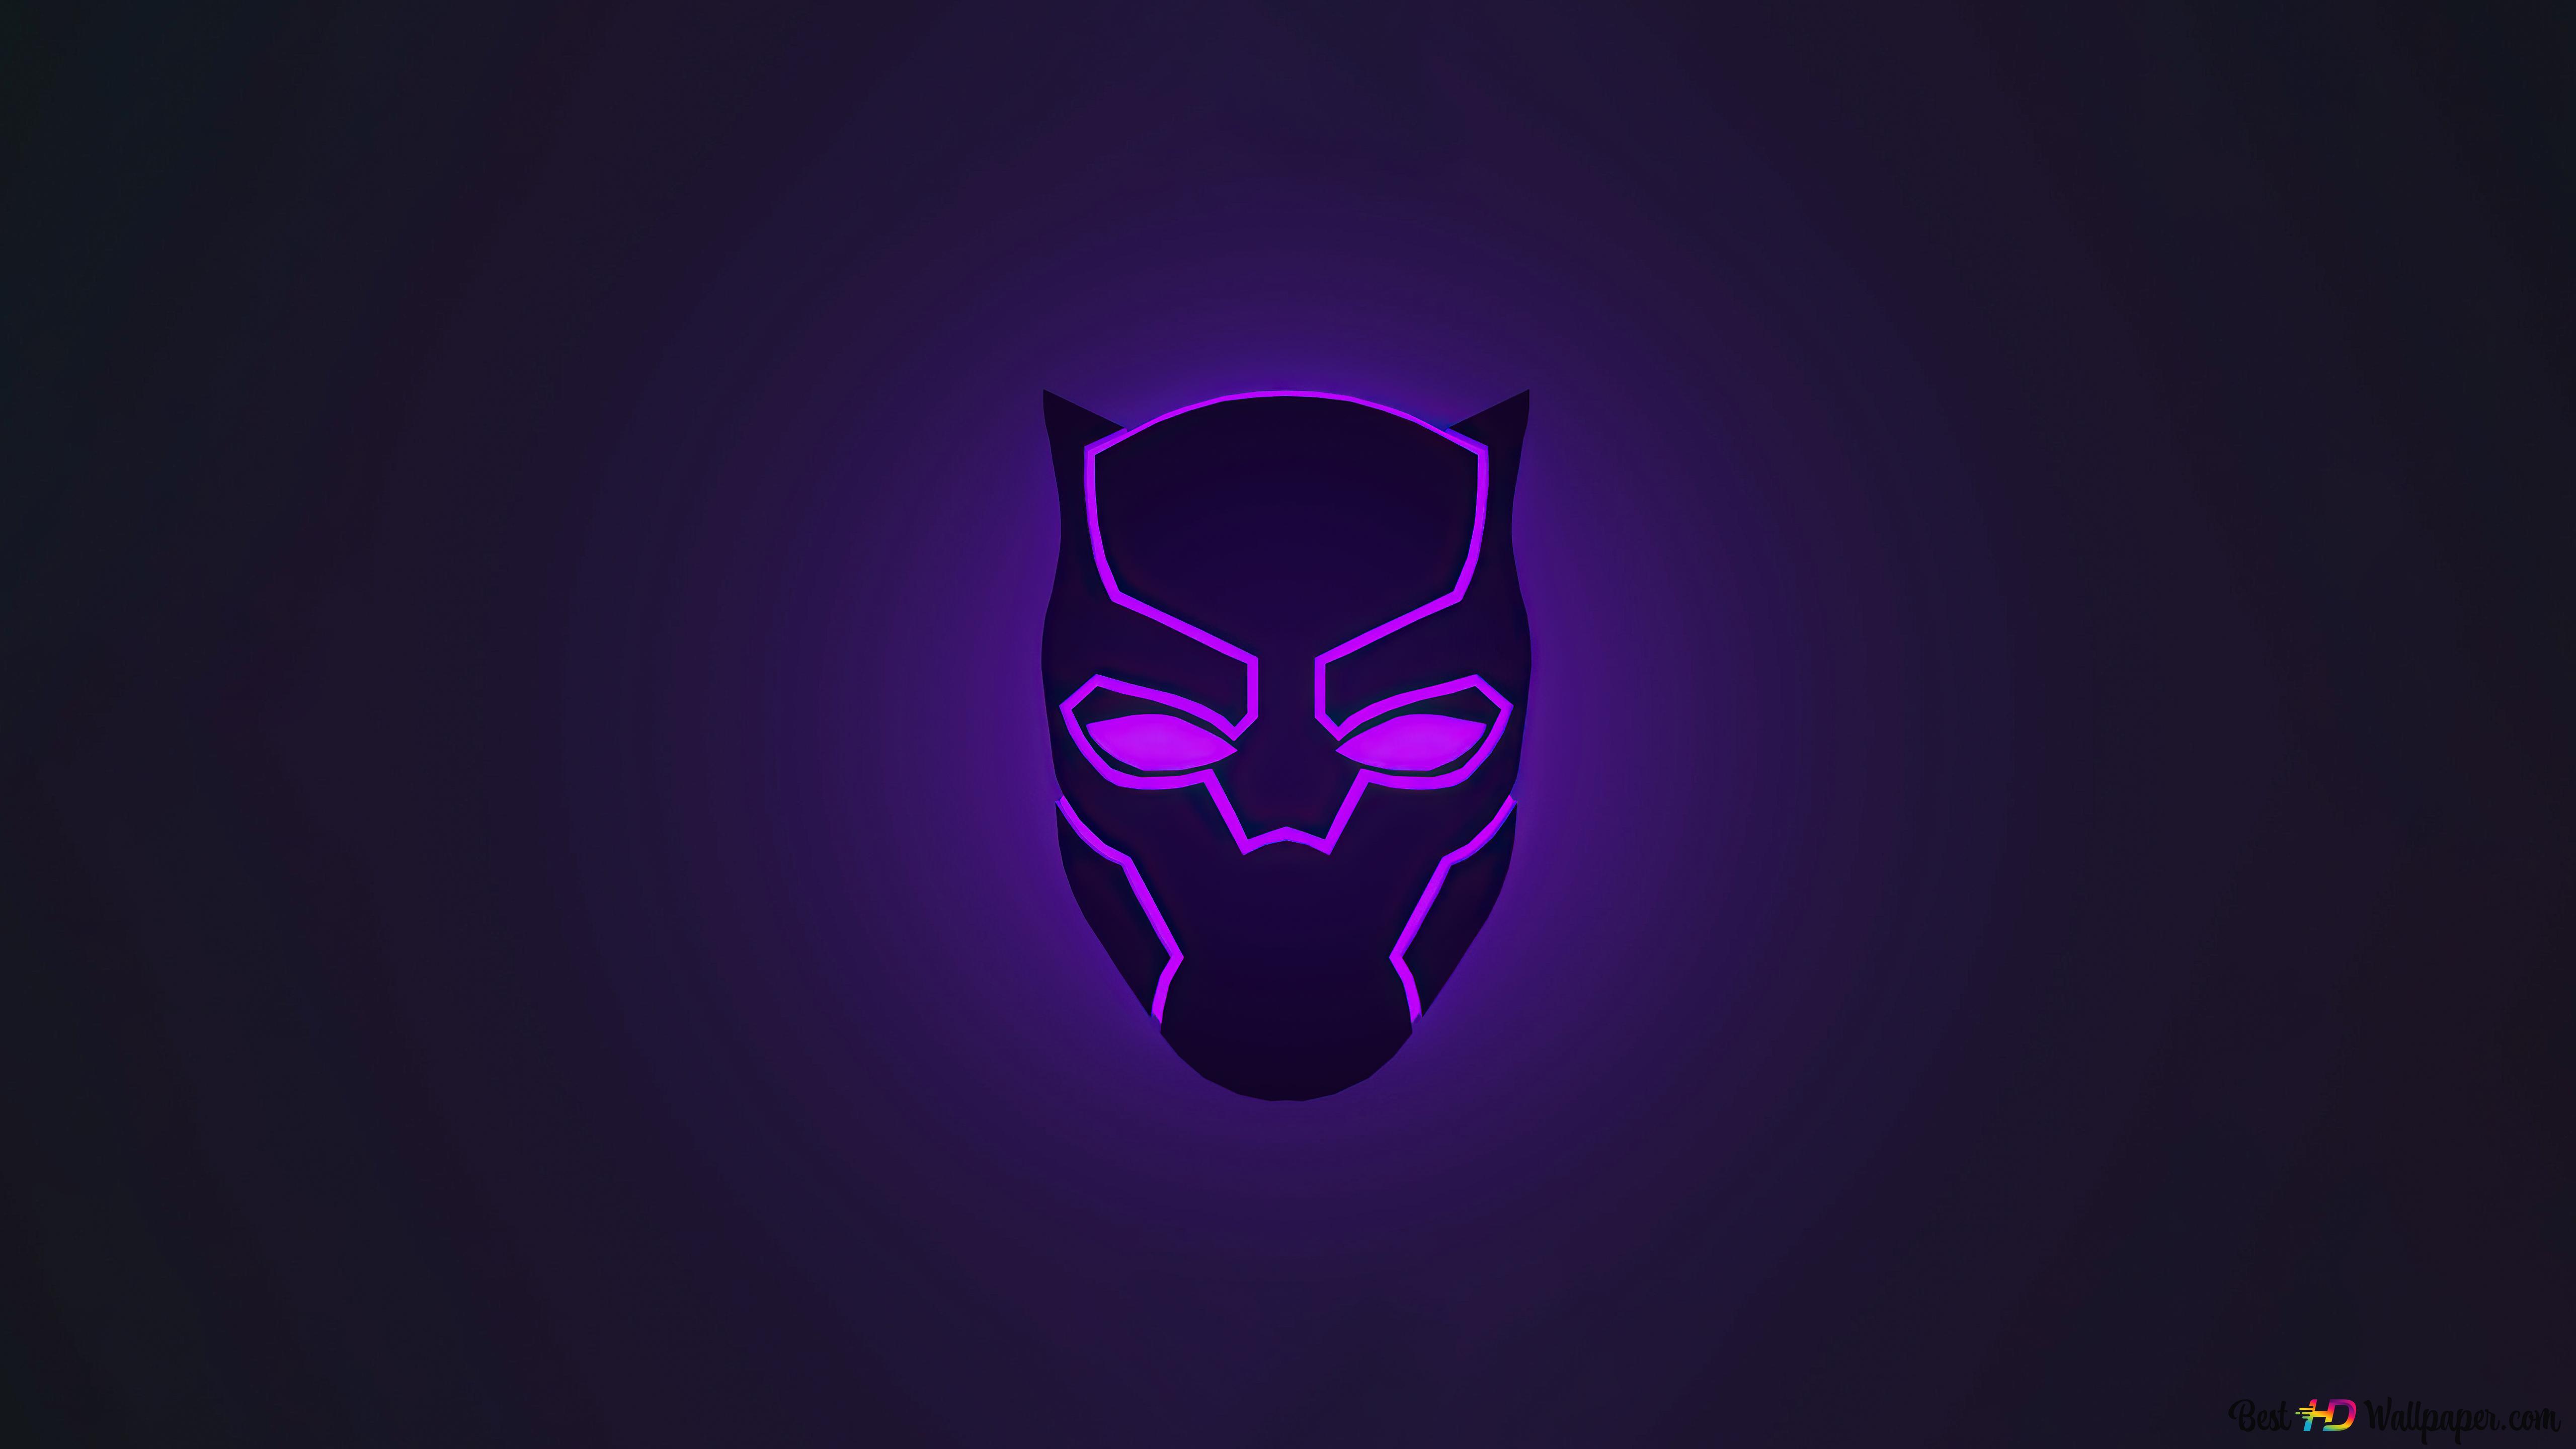 Black Panther In Black And Purple 4K wallpaper download